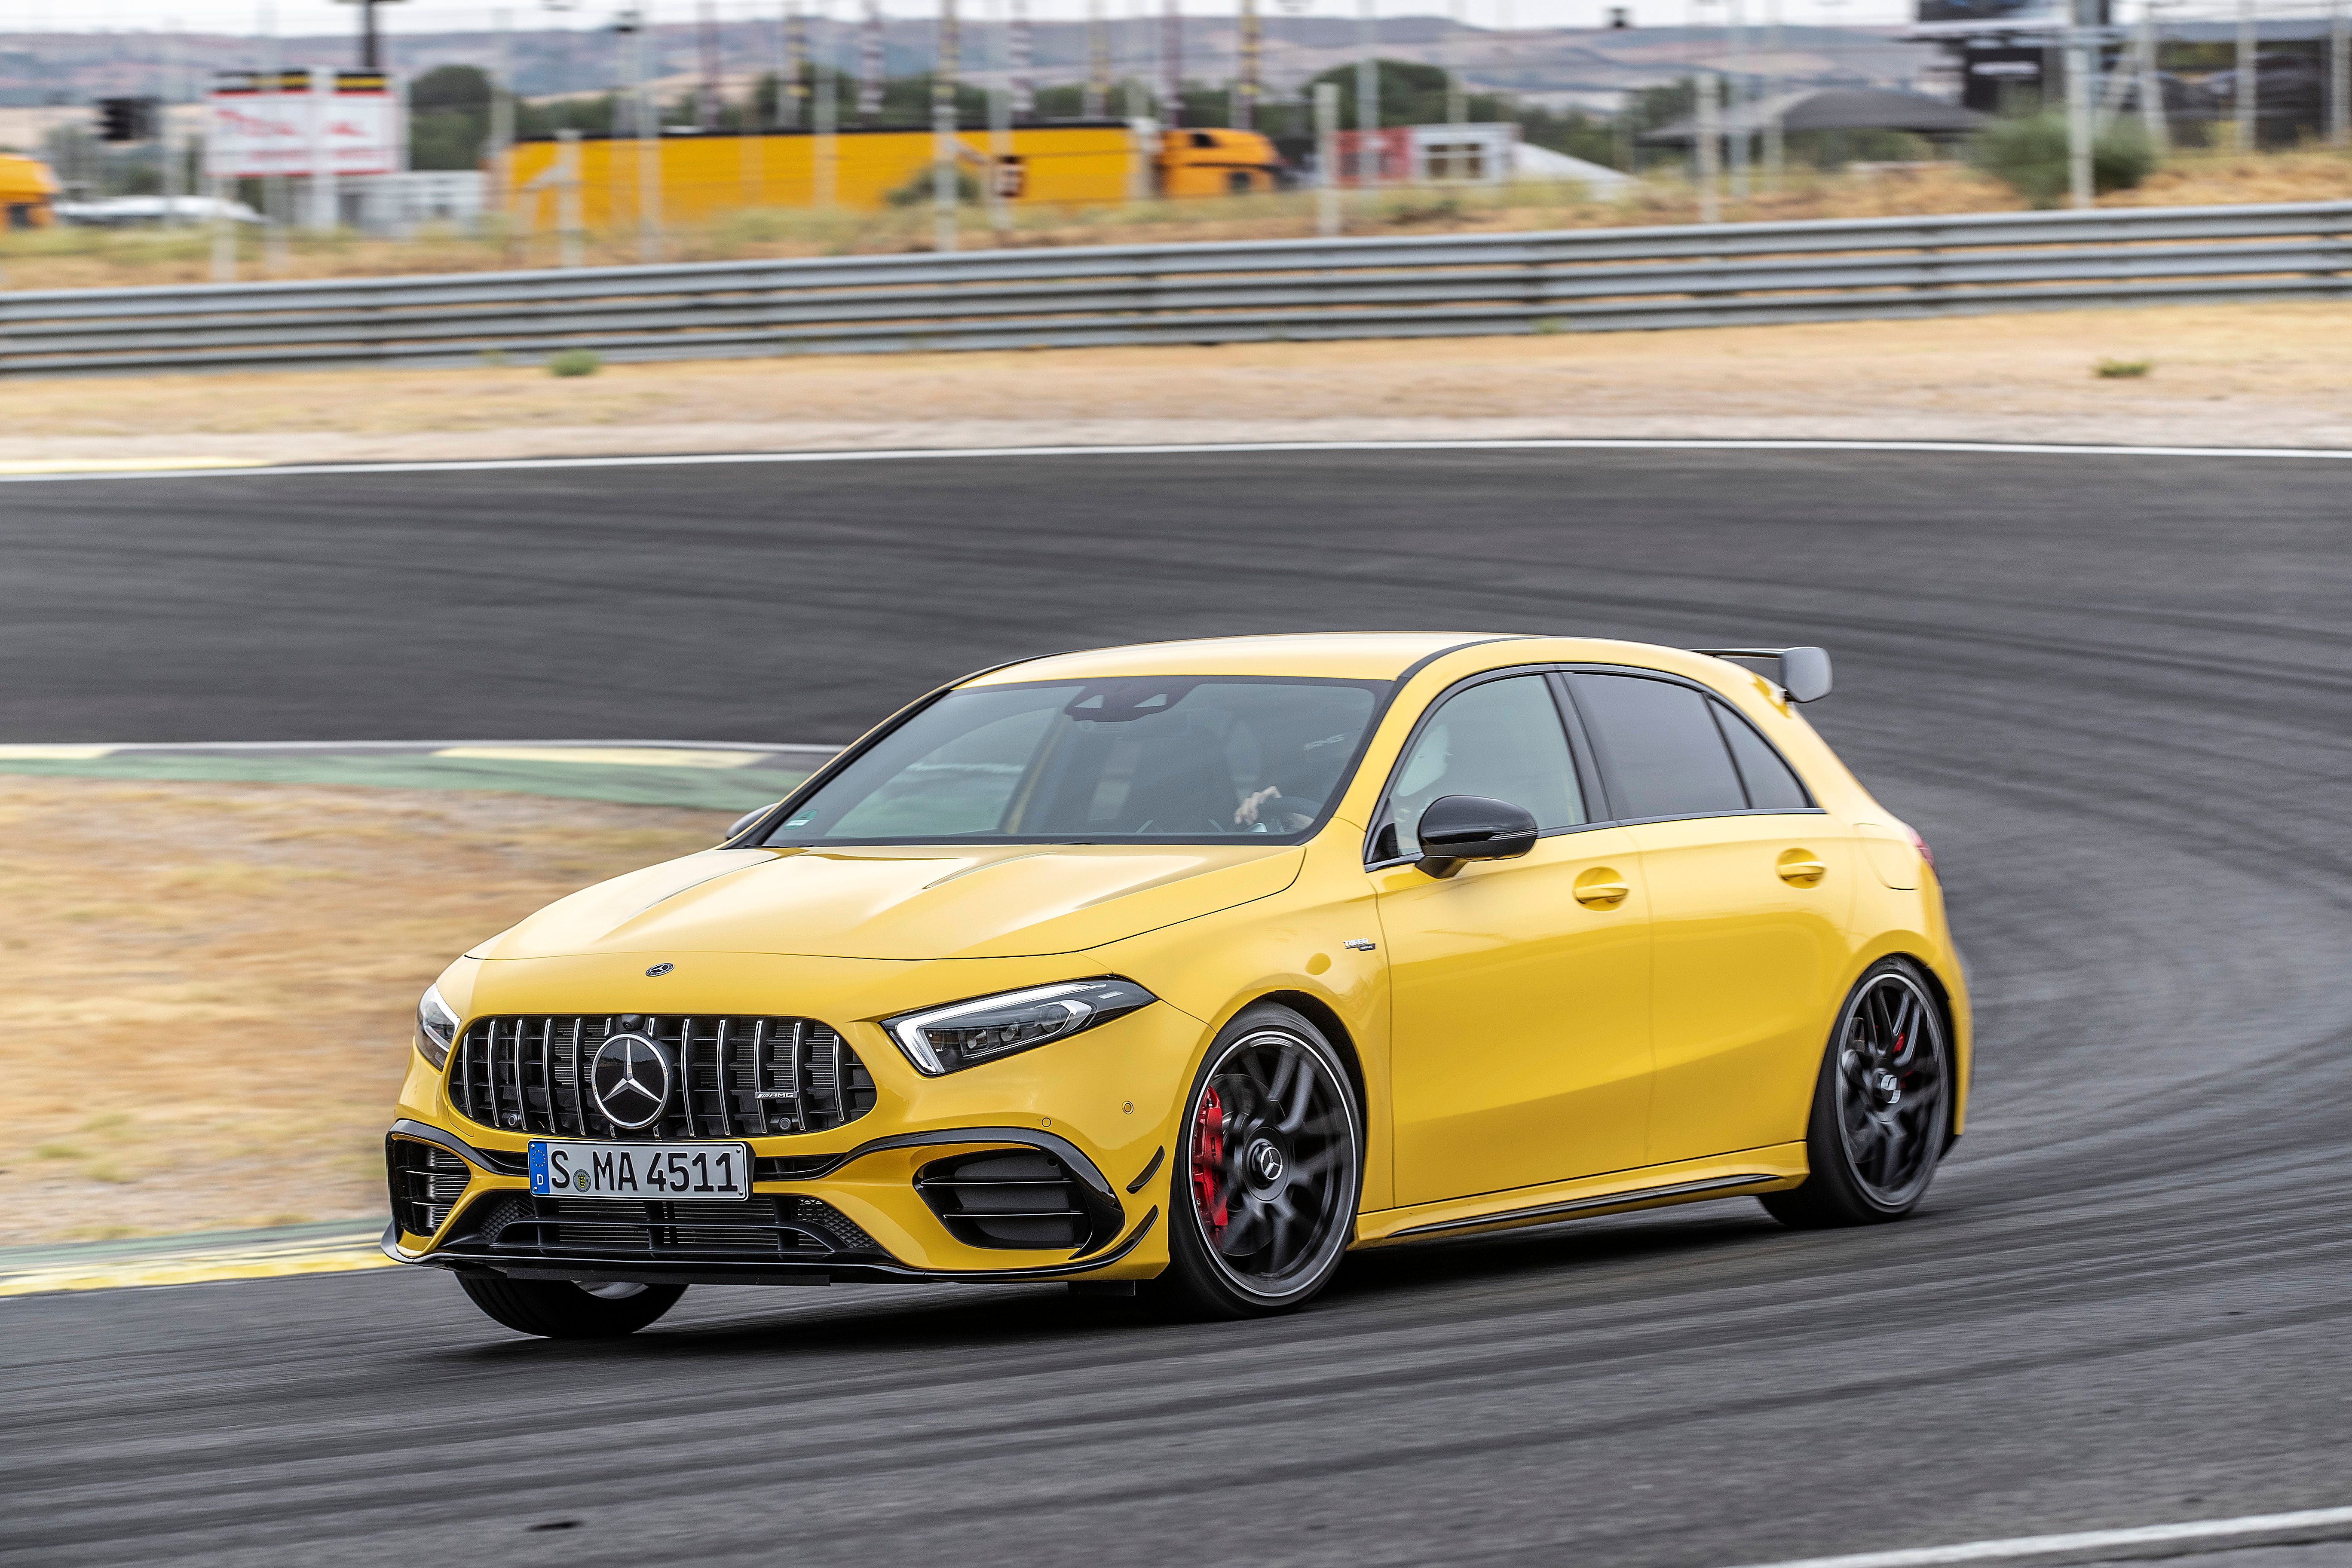 Mercedes A45 Amg Specs Mercedes Created An Entirely New Segment With the AMG A45